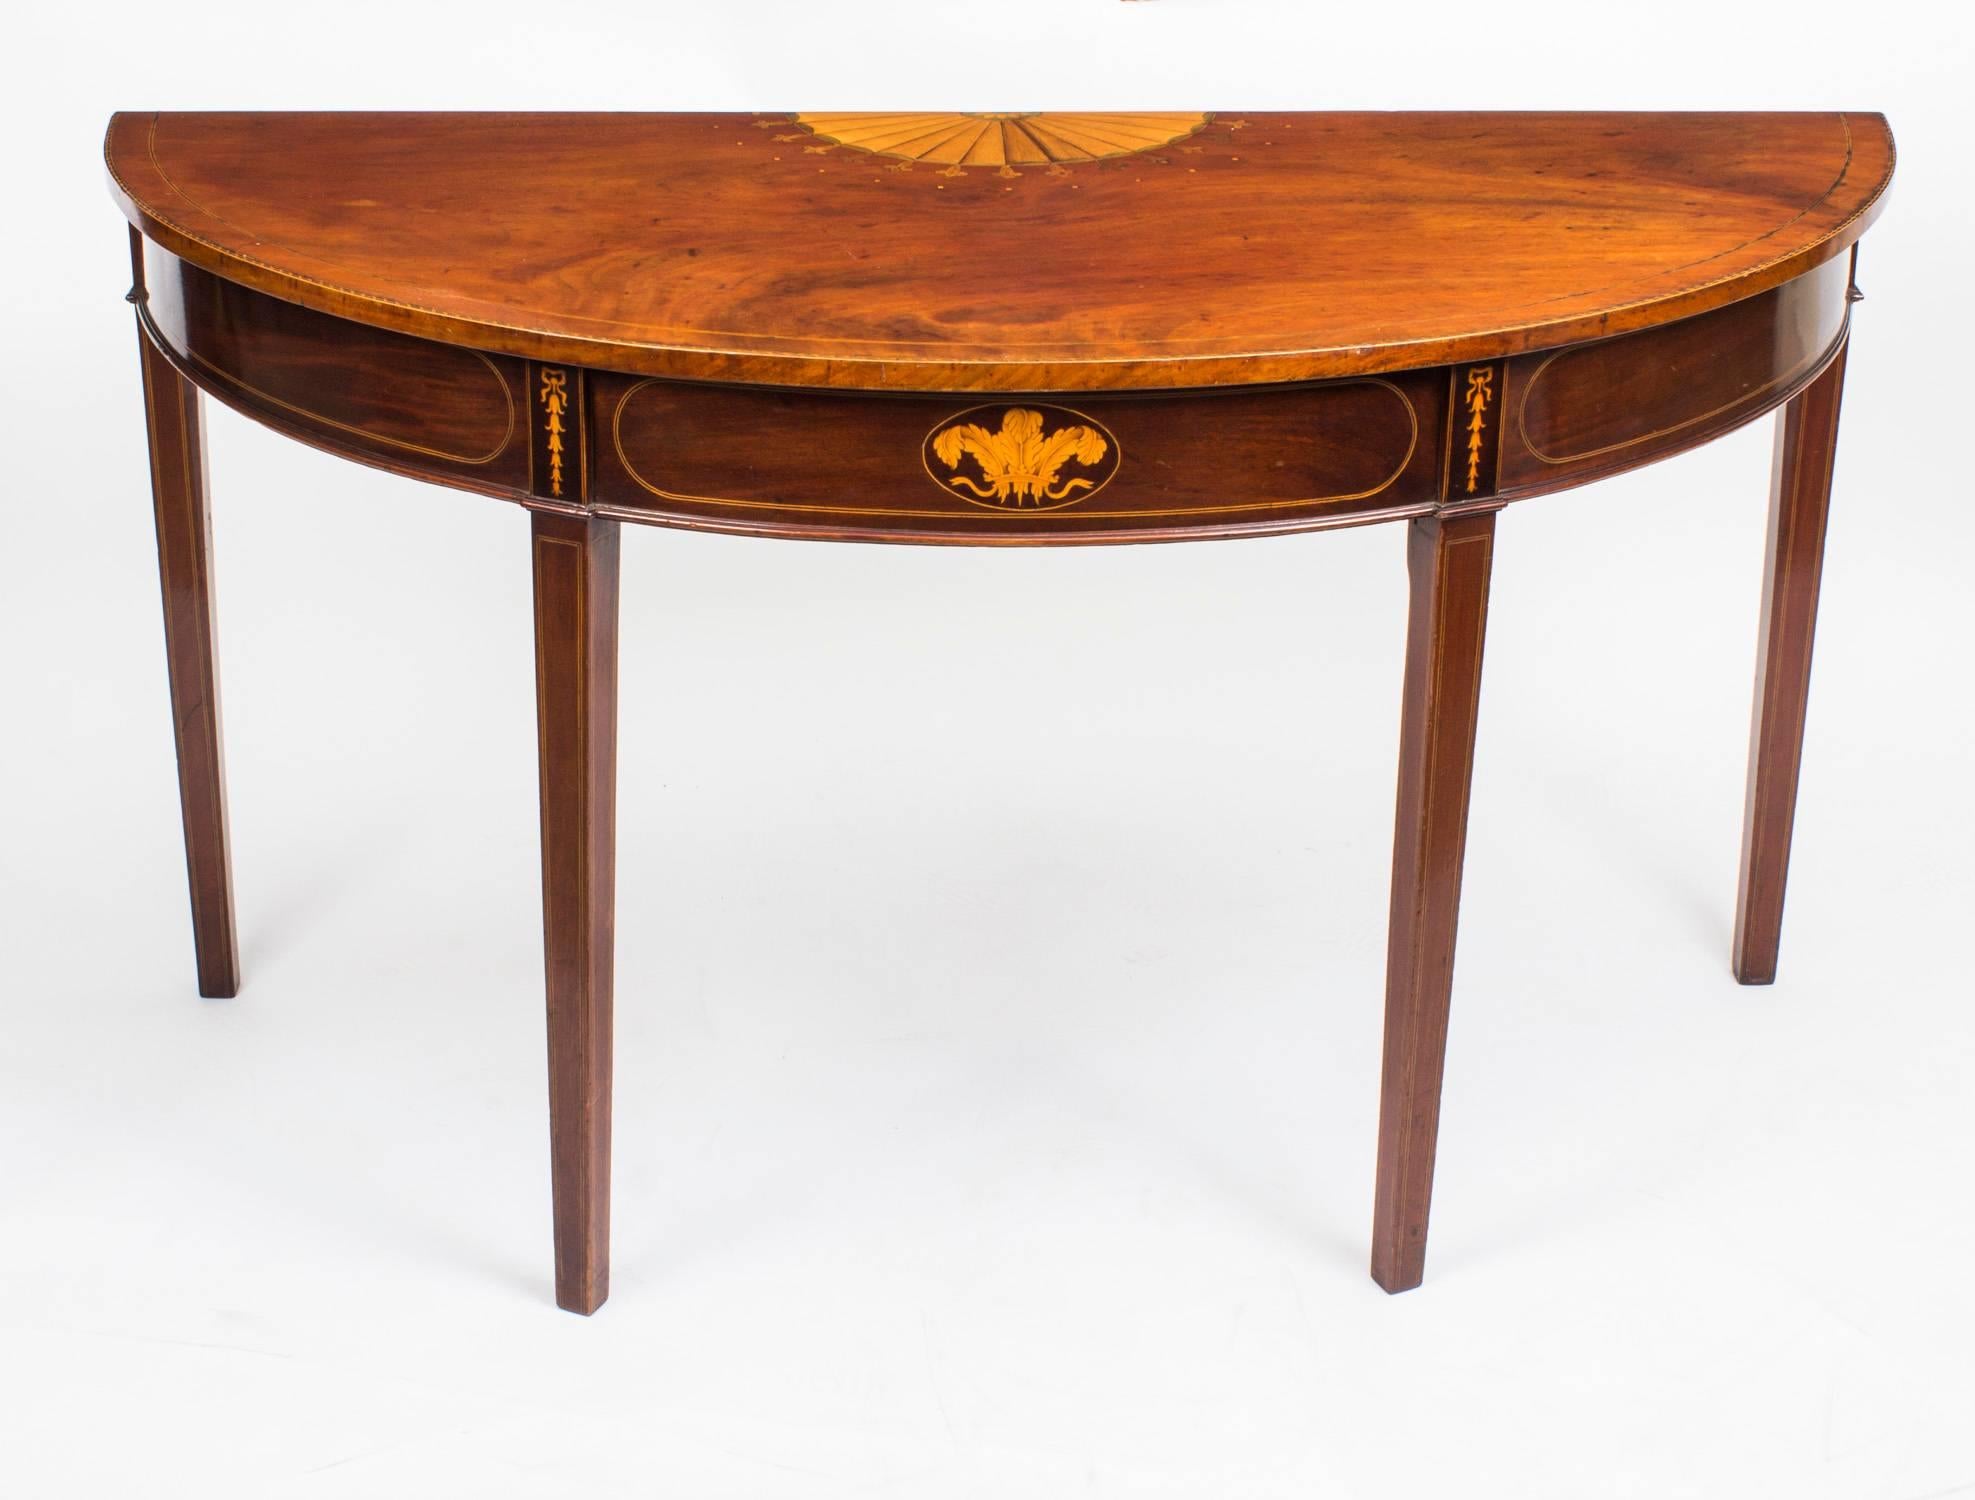 This is a beautiful antique George III flame mahogany demi lune console table, circa 1800 in date.

It features a beautiful boxwood and ebony chequered strung inlaid top with further inner double stringing. The rear has a central inlaid boxwood